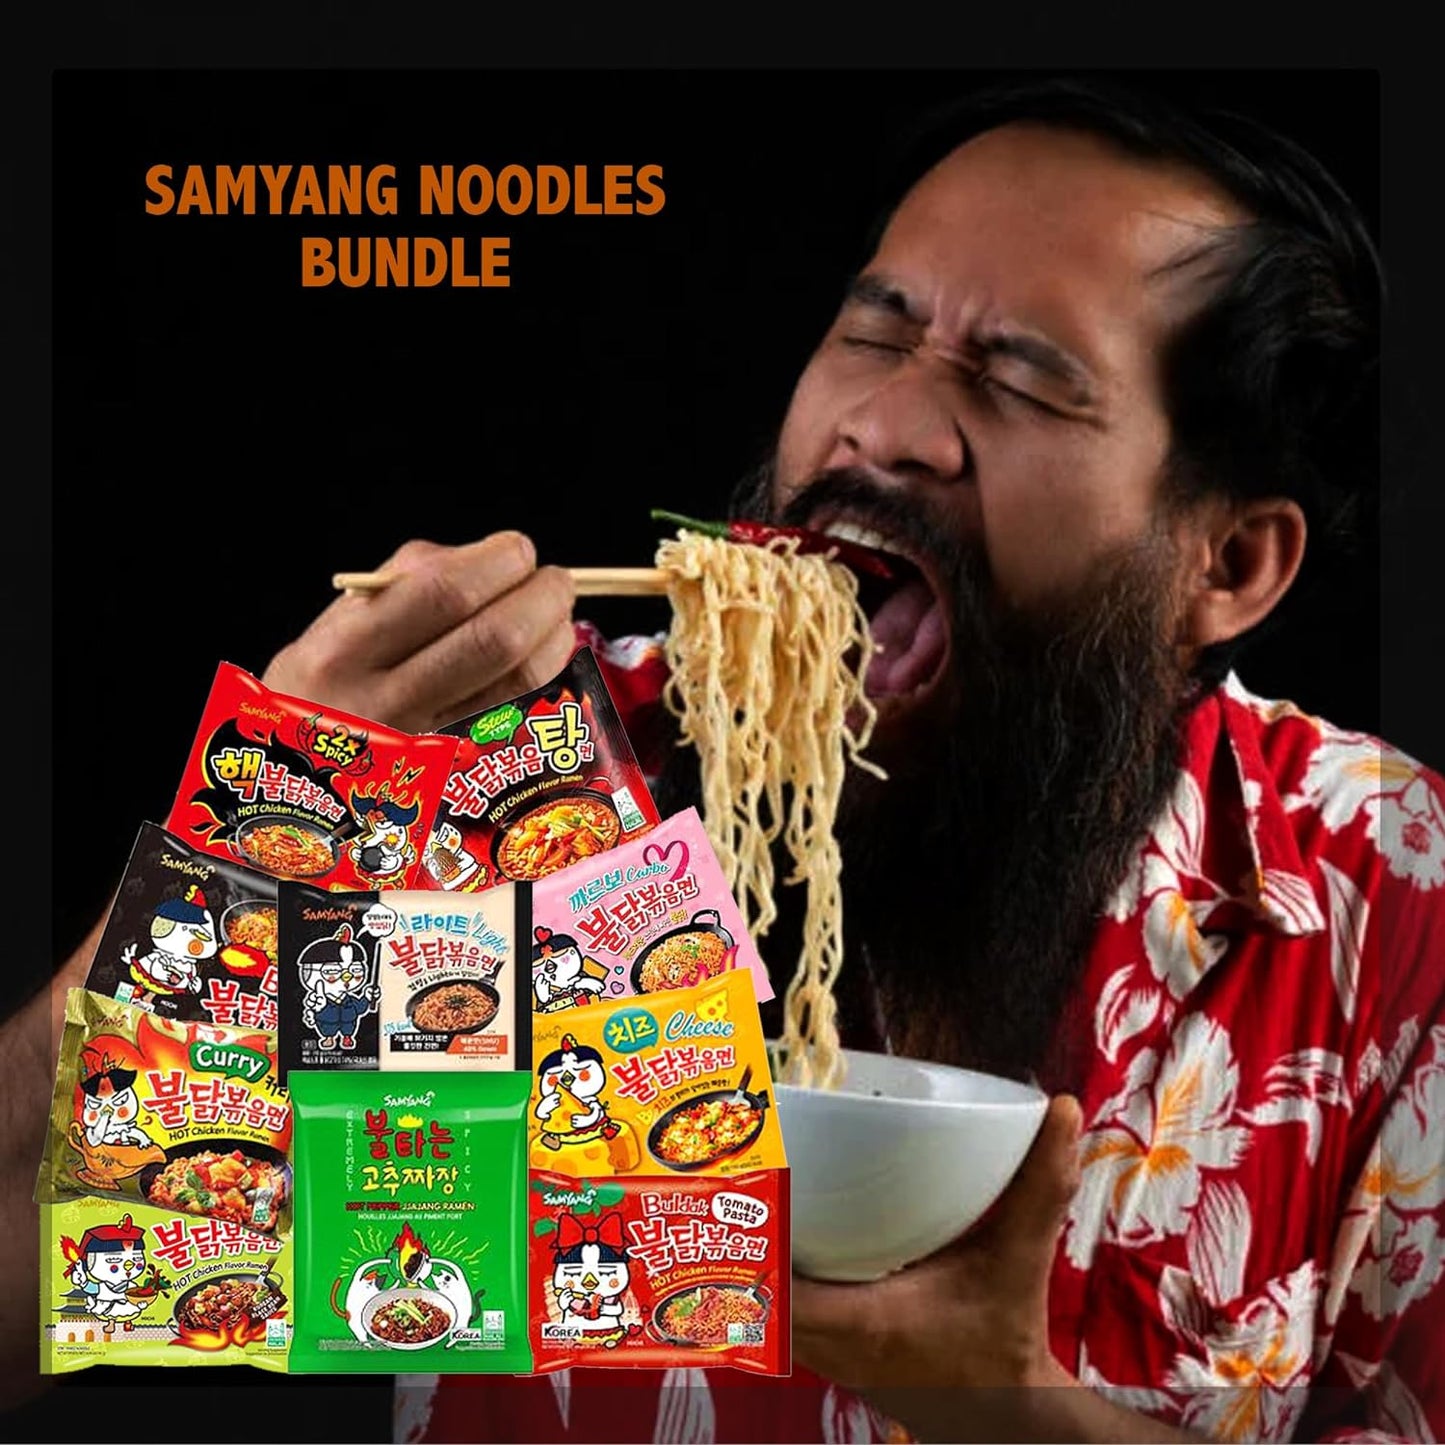 SAMYANG Korean 10 Pack Variety Noodles with Bento Snack! Includes Fortune Cookie & Pair of Chopsticks!